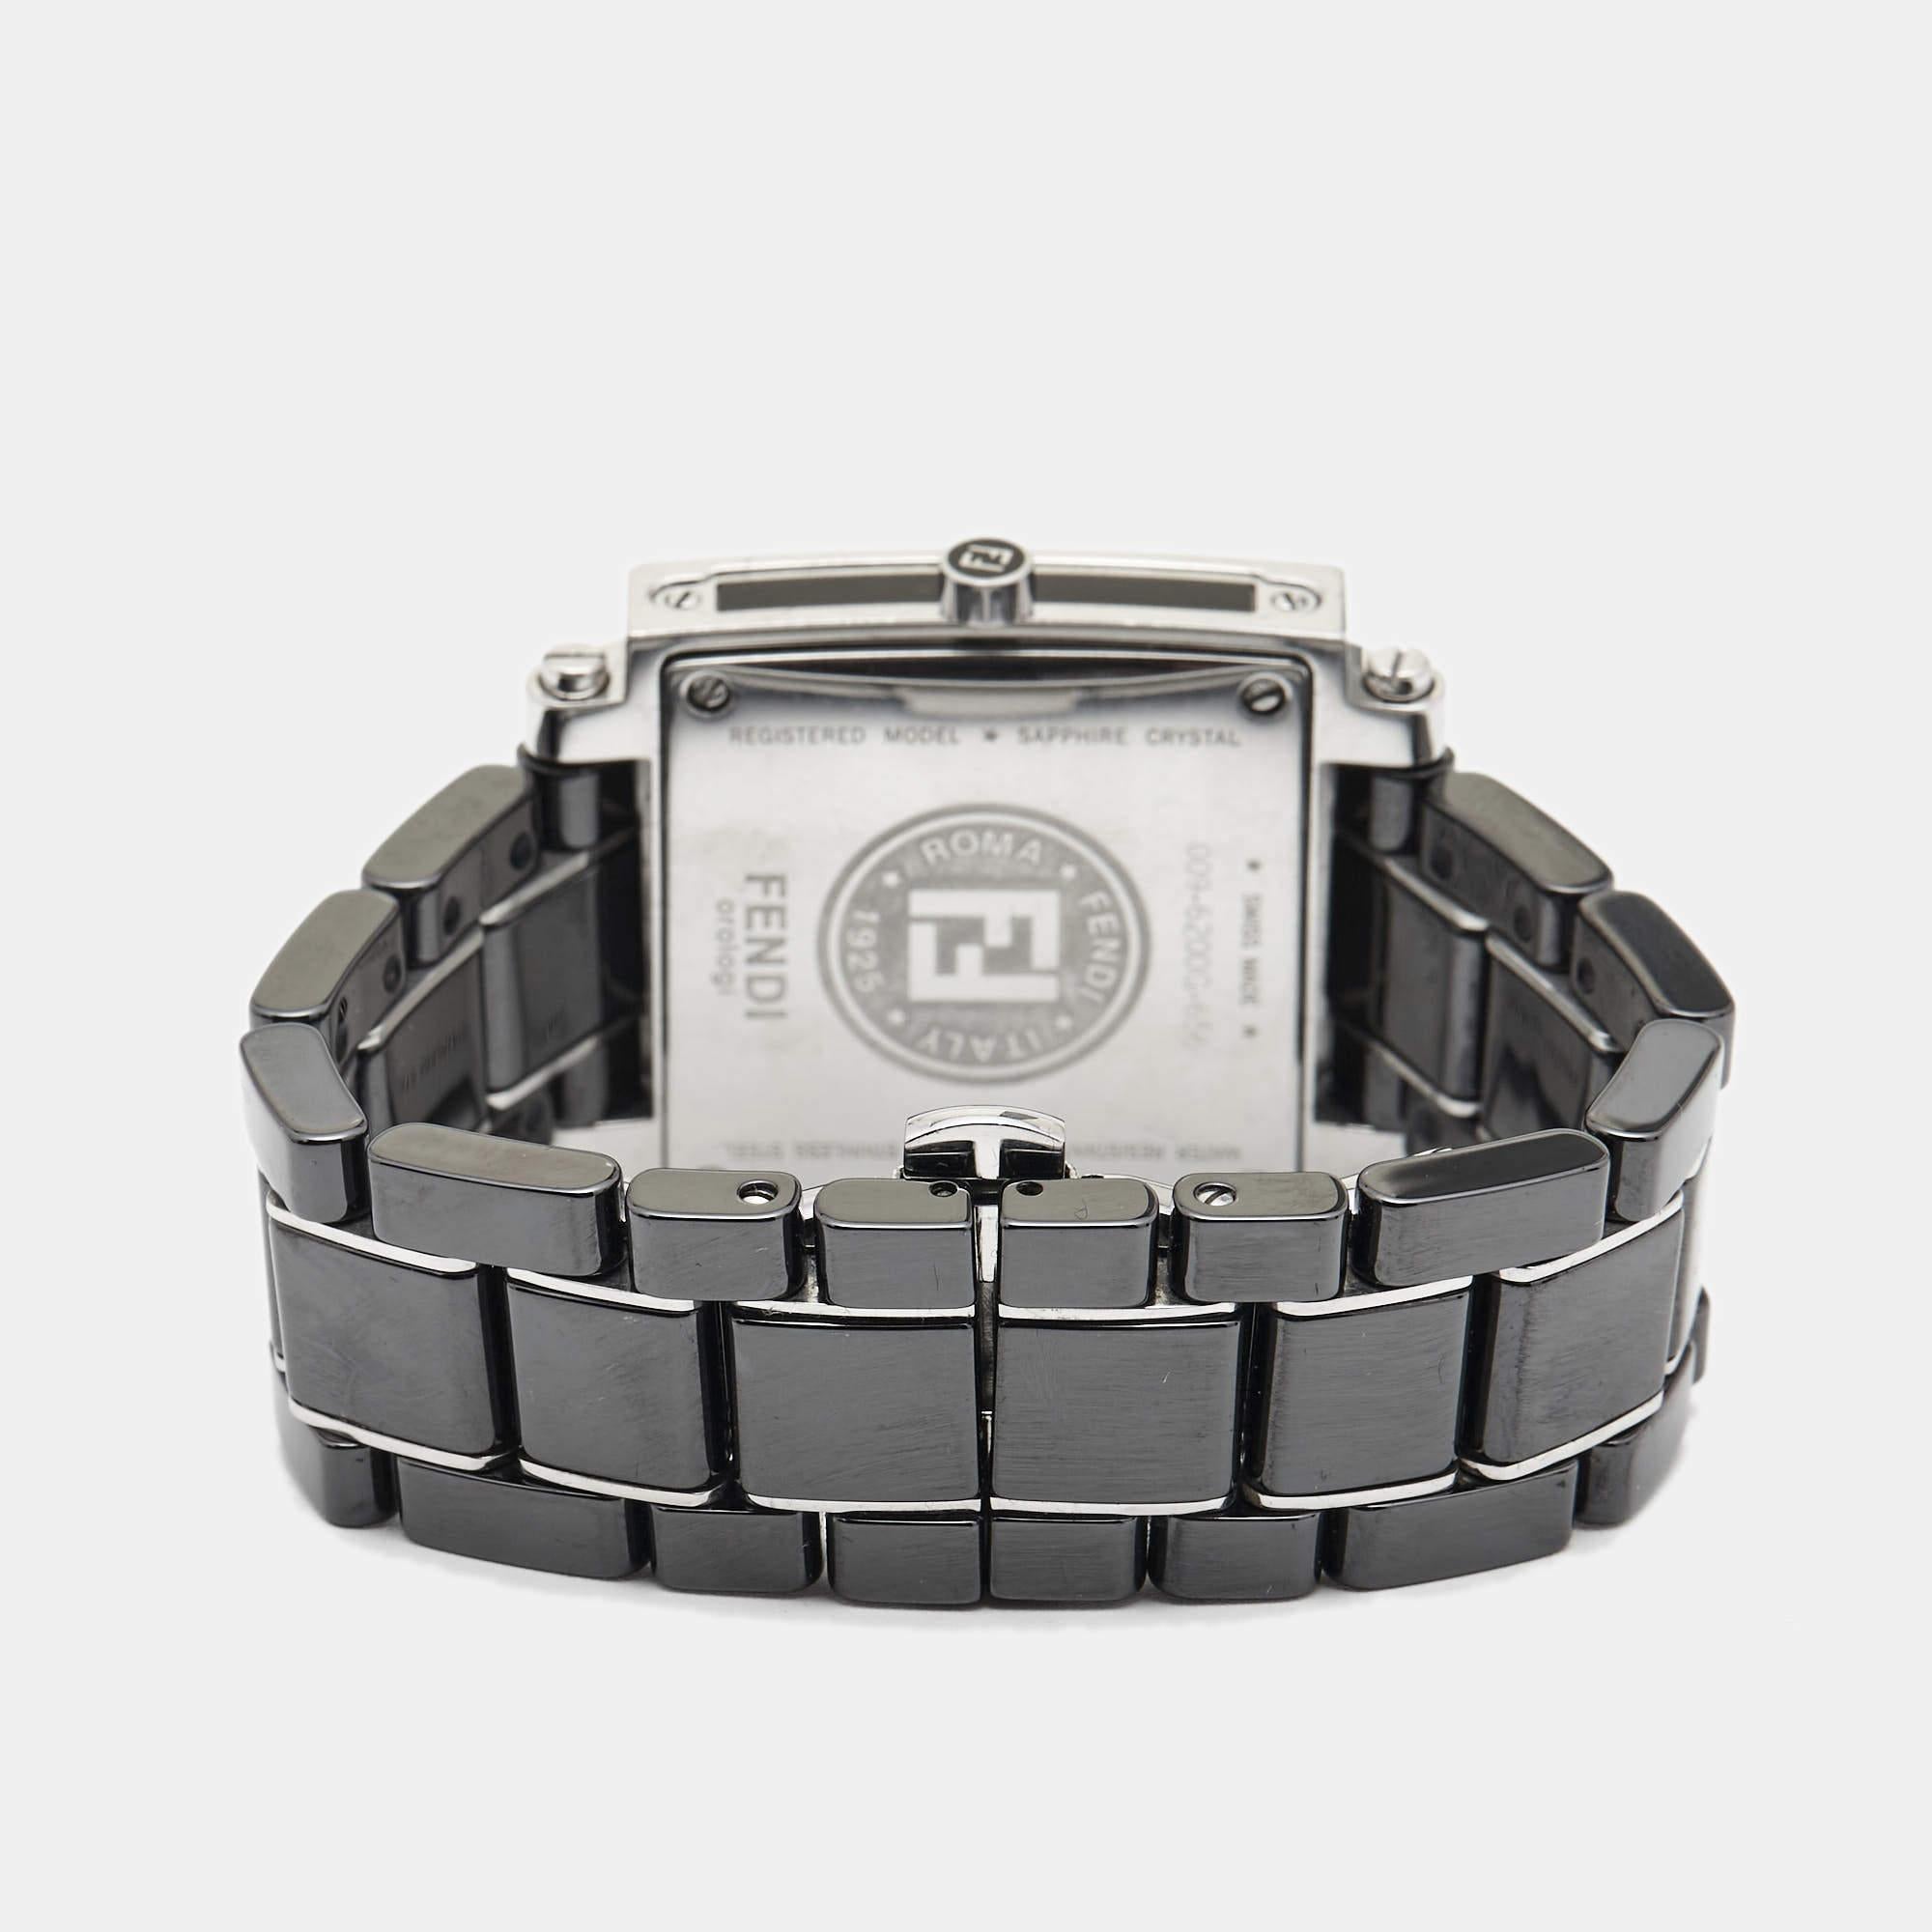 Let this Fendi wristwatch accompany you with ease and luxurious style. Beautifully crafted using the best quality materials, this authentic branded watch is built to be a standout accessory for your wrist.

